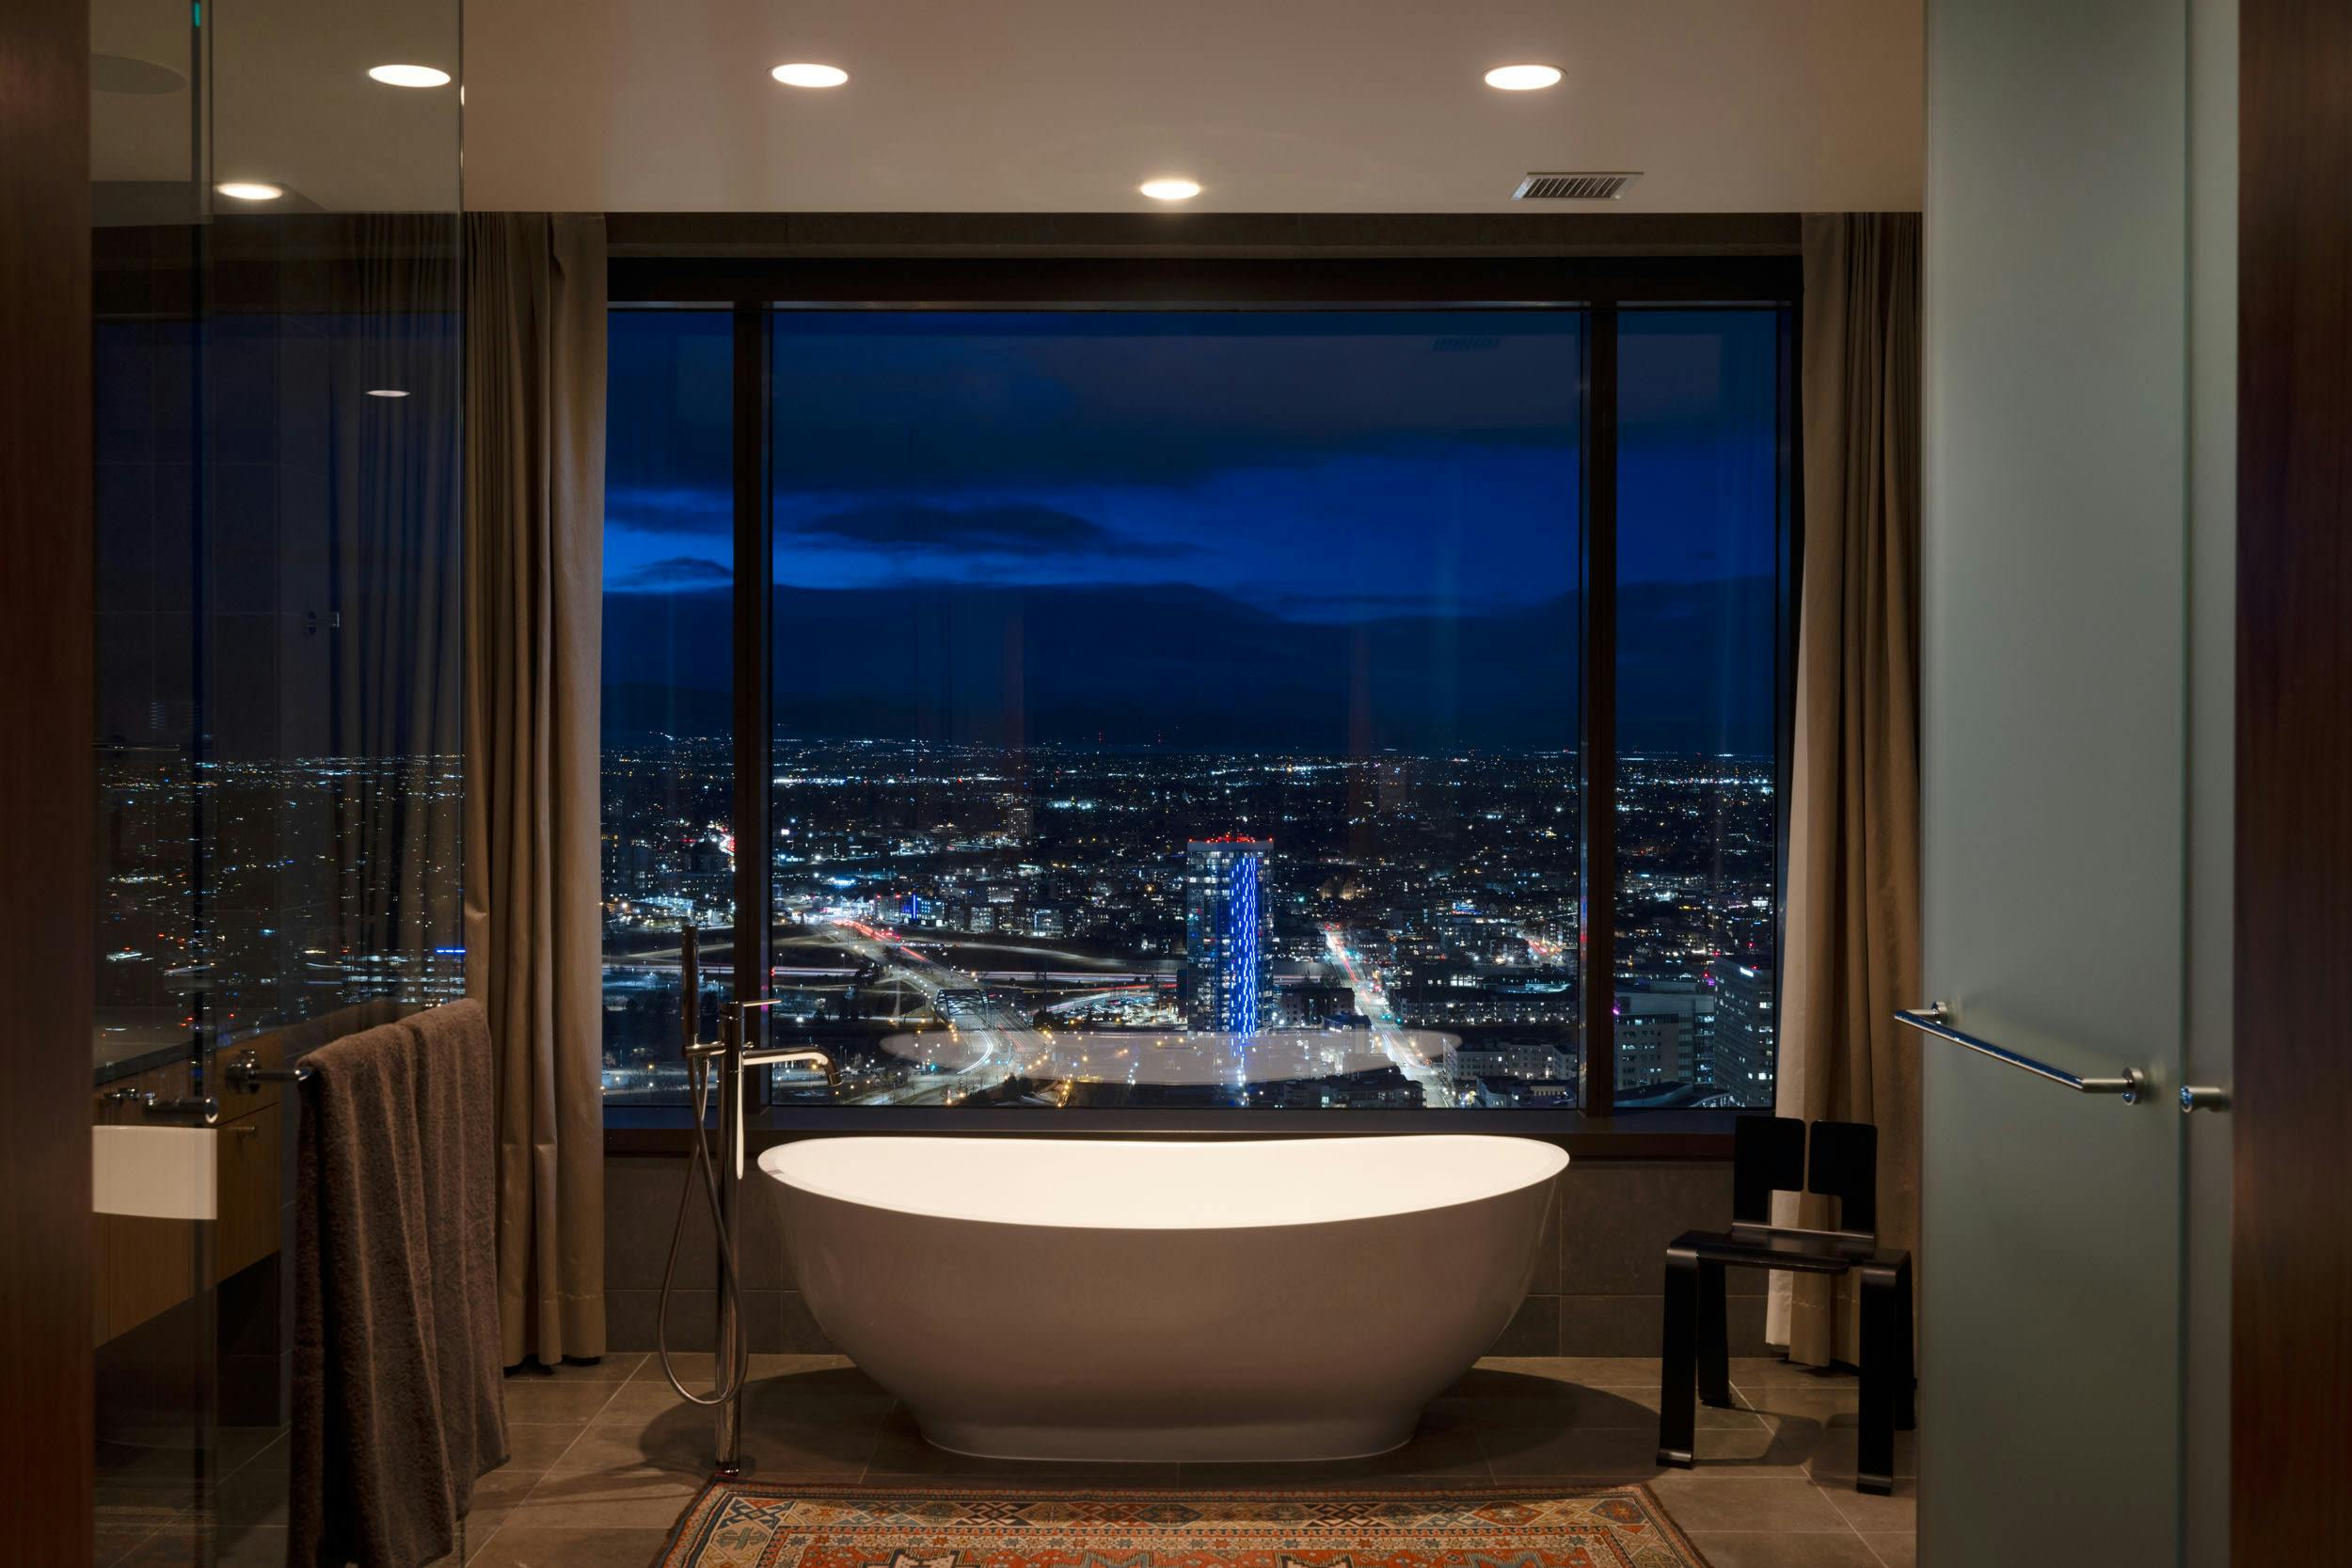 a bathtub in a bathroom with a view of a city at night from the window of a high rise building